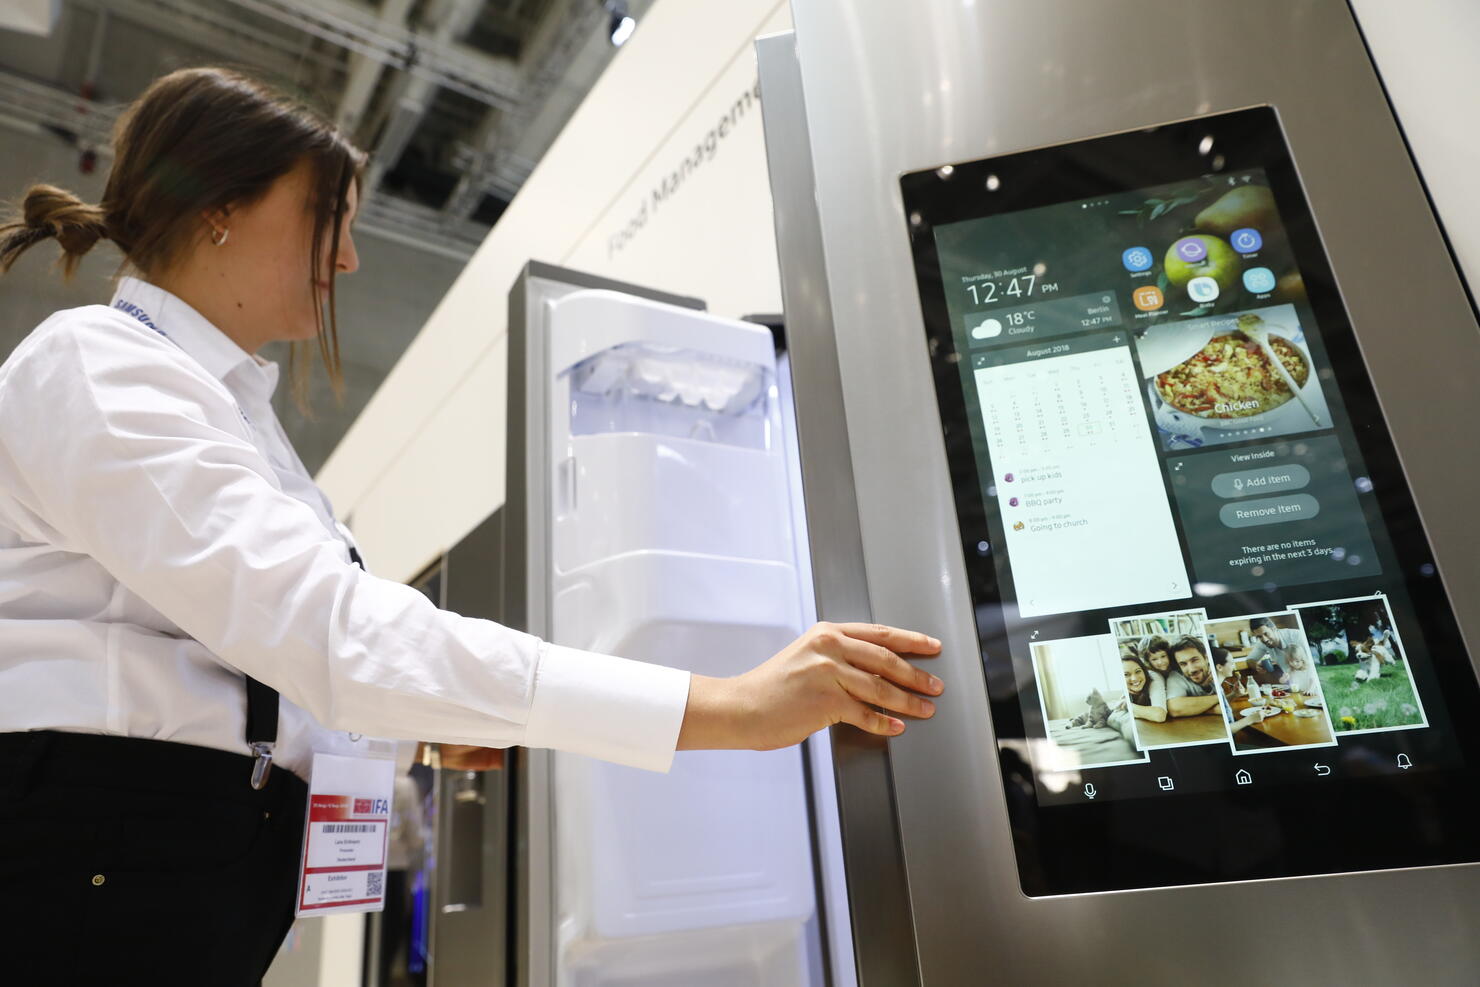 Refrigerdating is now a thing thanks to smart Fridges 